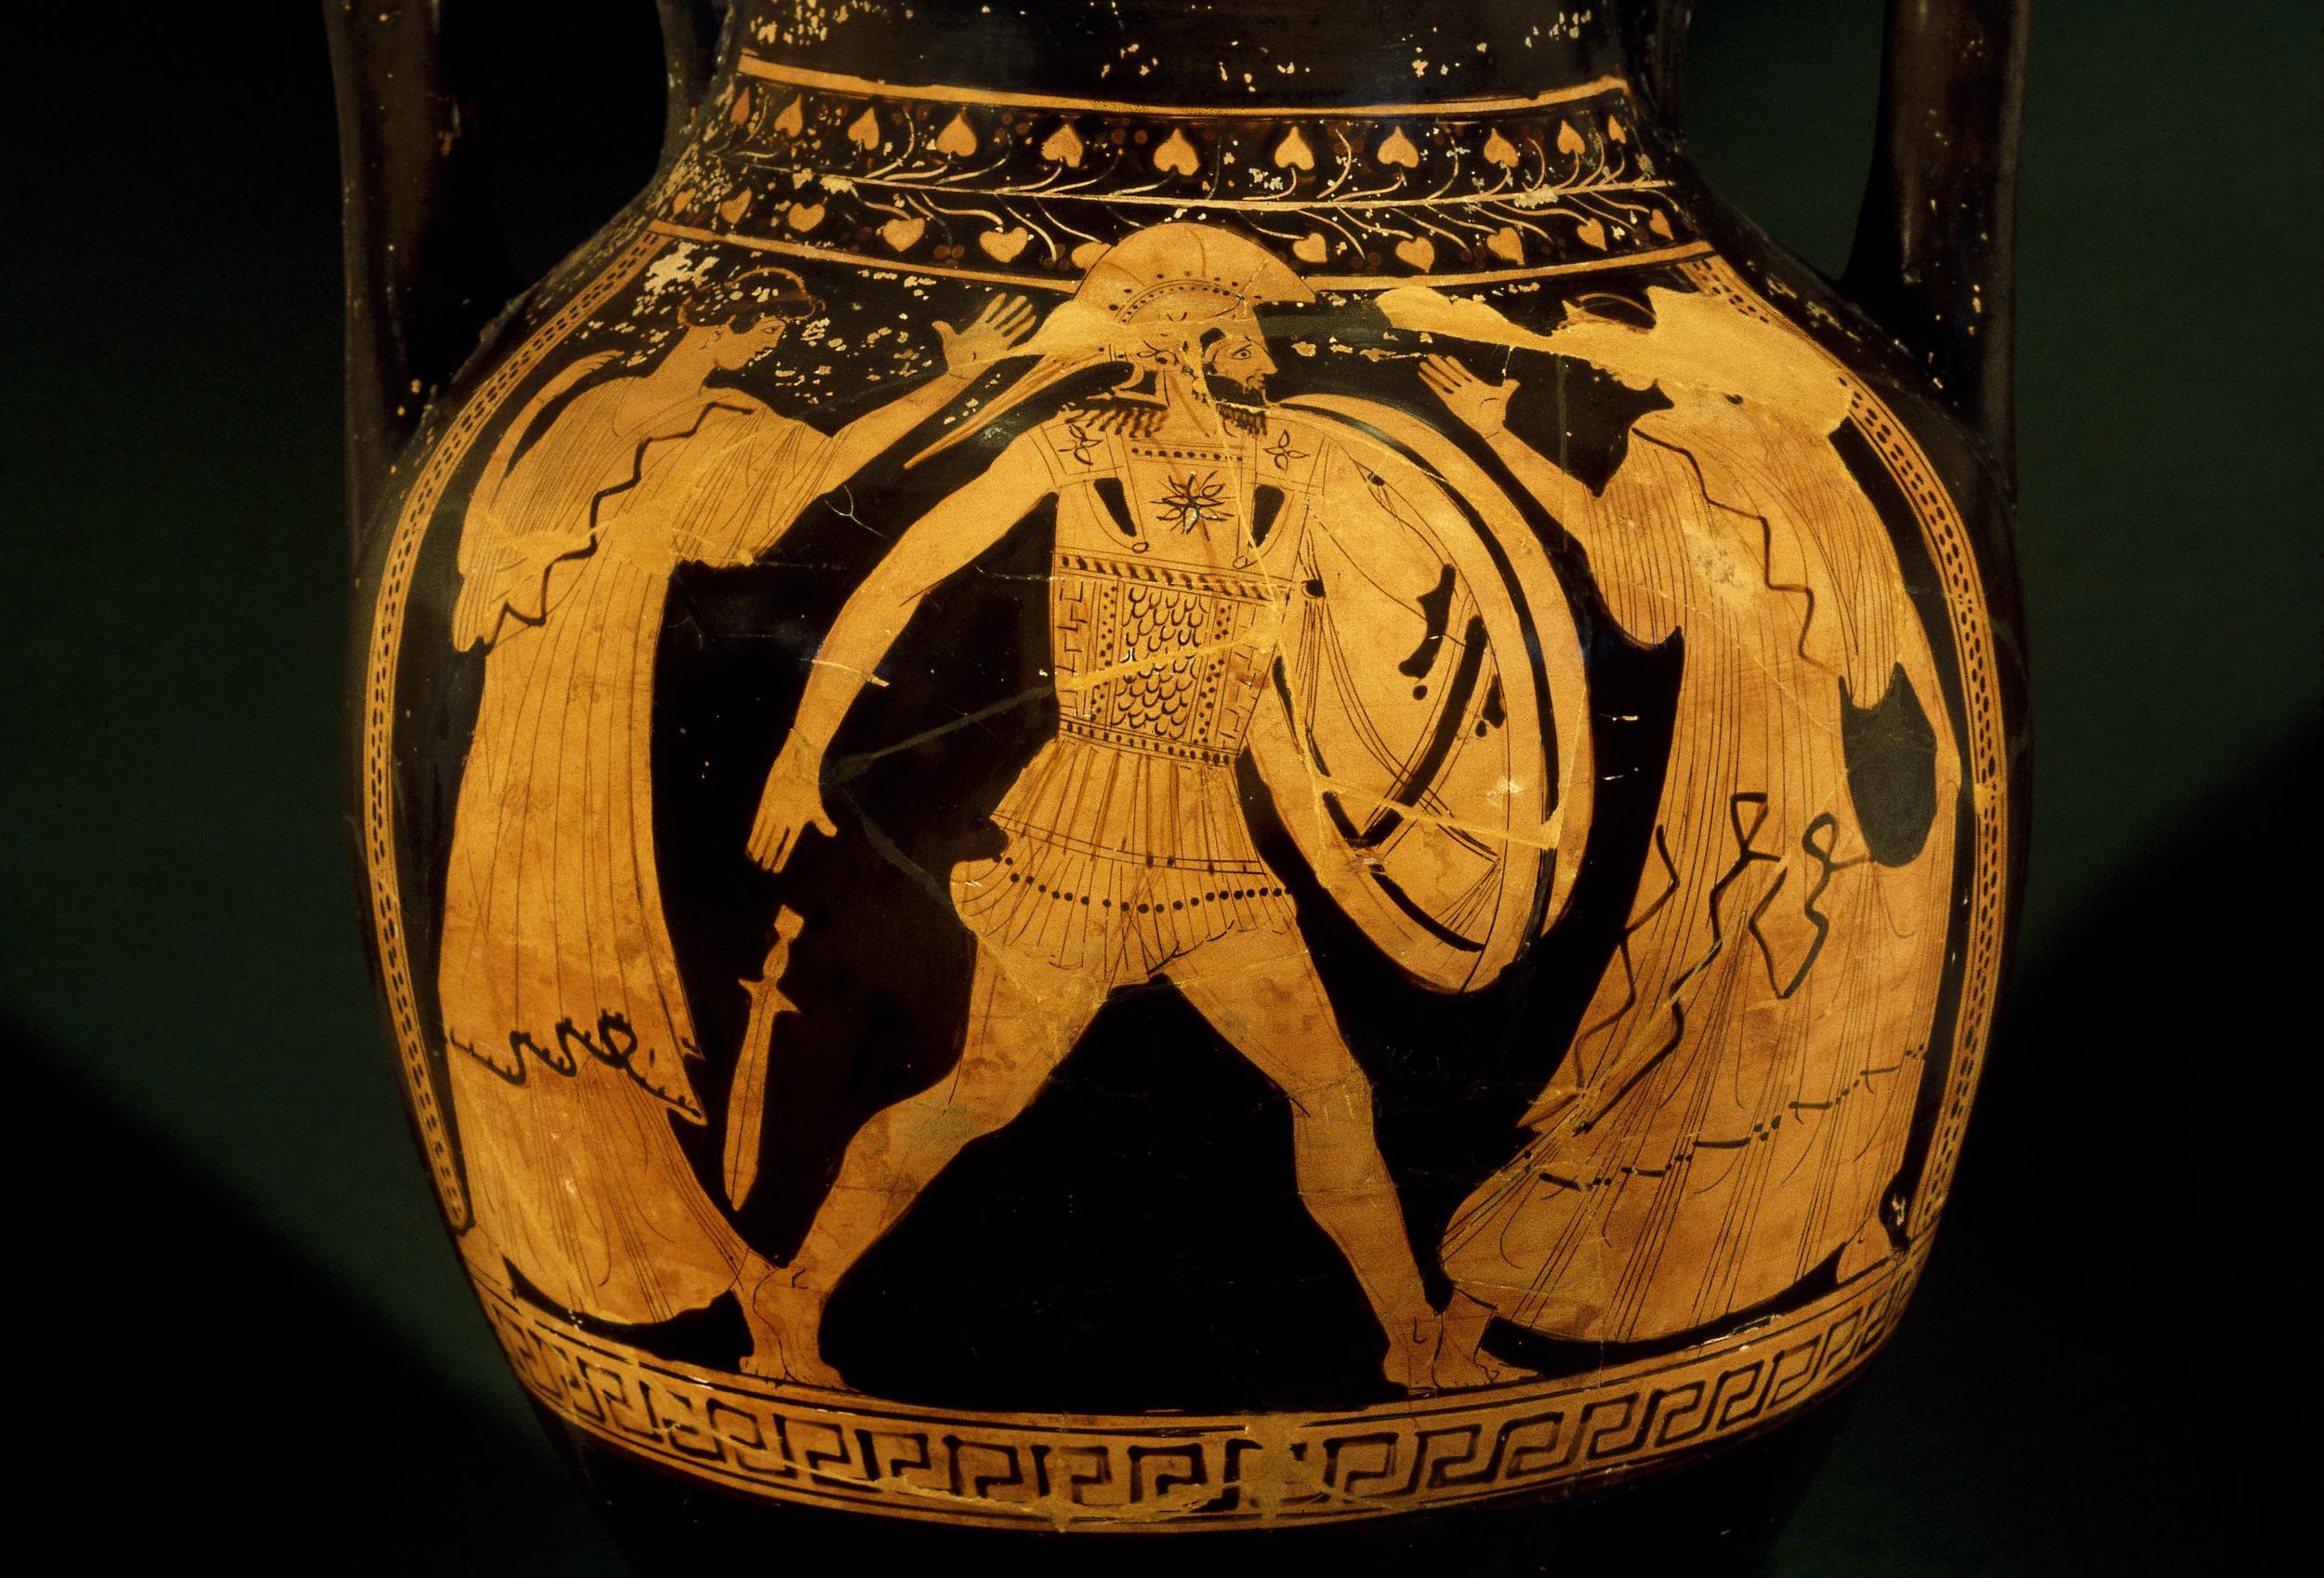 Menelaus chases Helen, while another woman flees in the other direction. Menelaus wears Greek armour with a helm and shield, and drops his sword in surprise. Helen wears a himation, and is turned back to look at Menelaus.